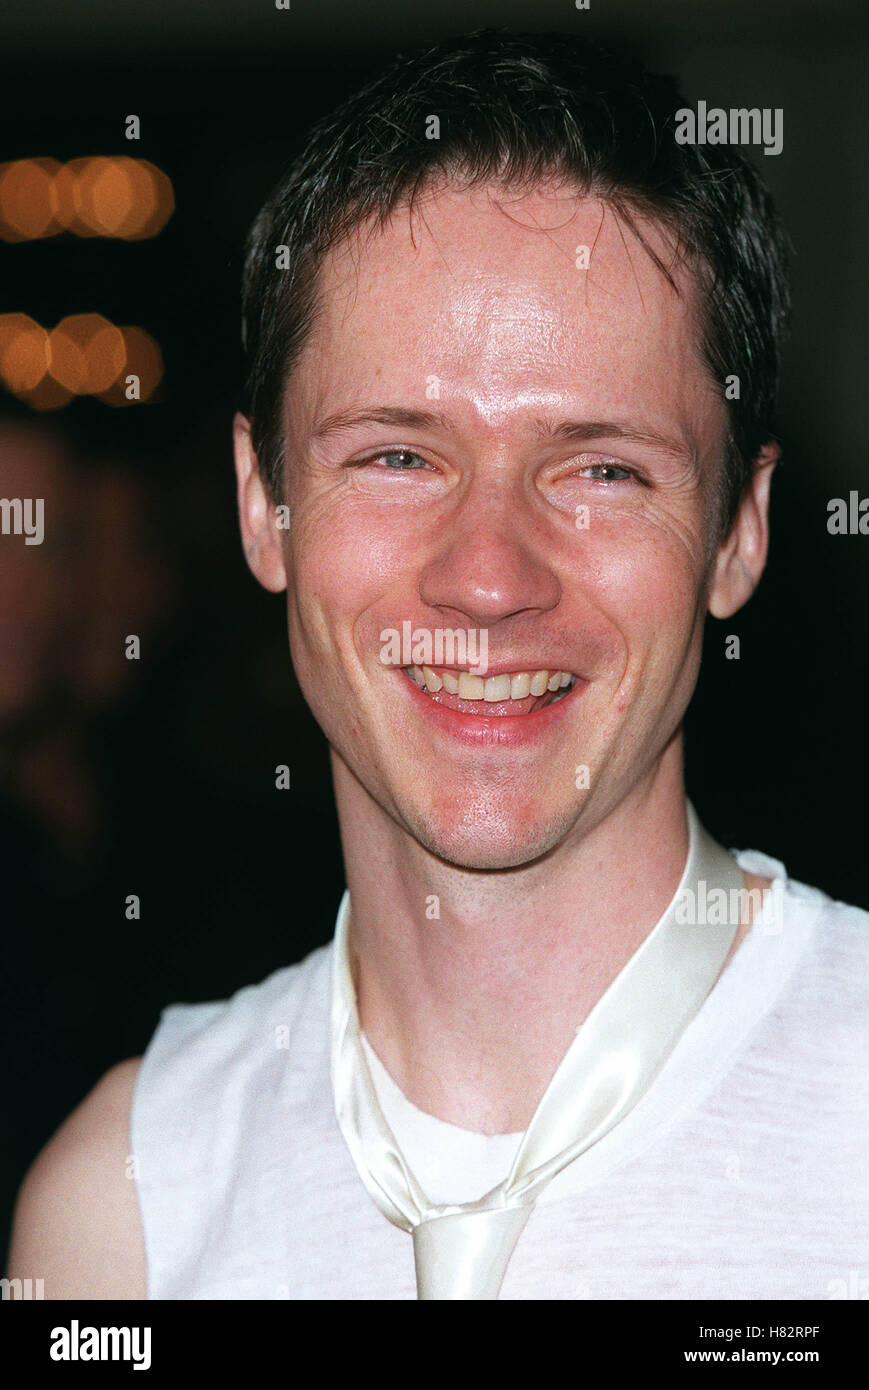 JOHN CAMERON MITCHELL 'HEDWIG AND THE ANGRY INCH'F-P LOS ANGELES USA 12 July 2001 Stock Photo